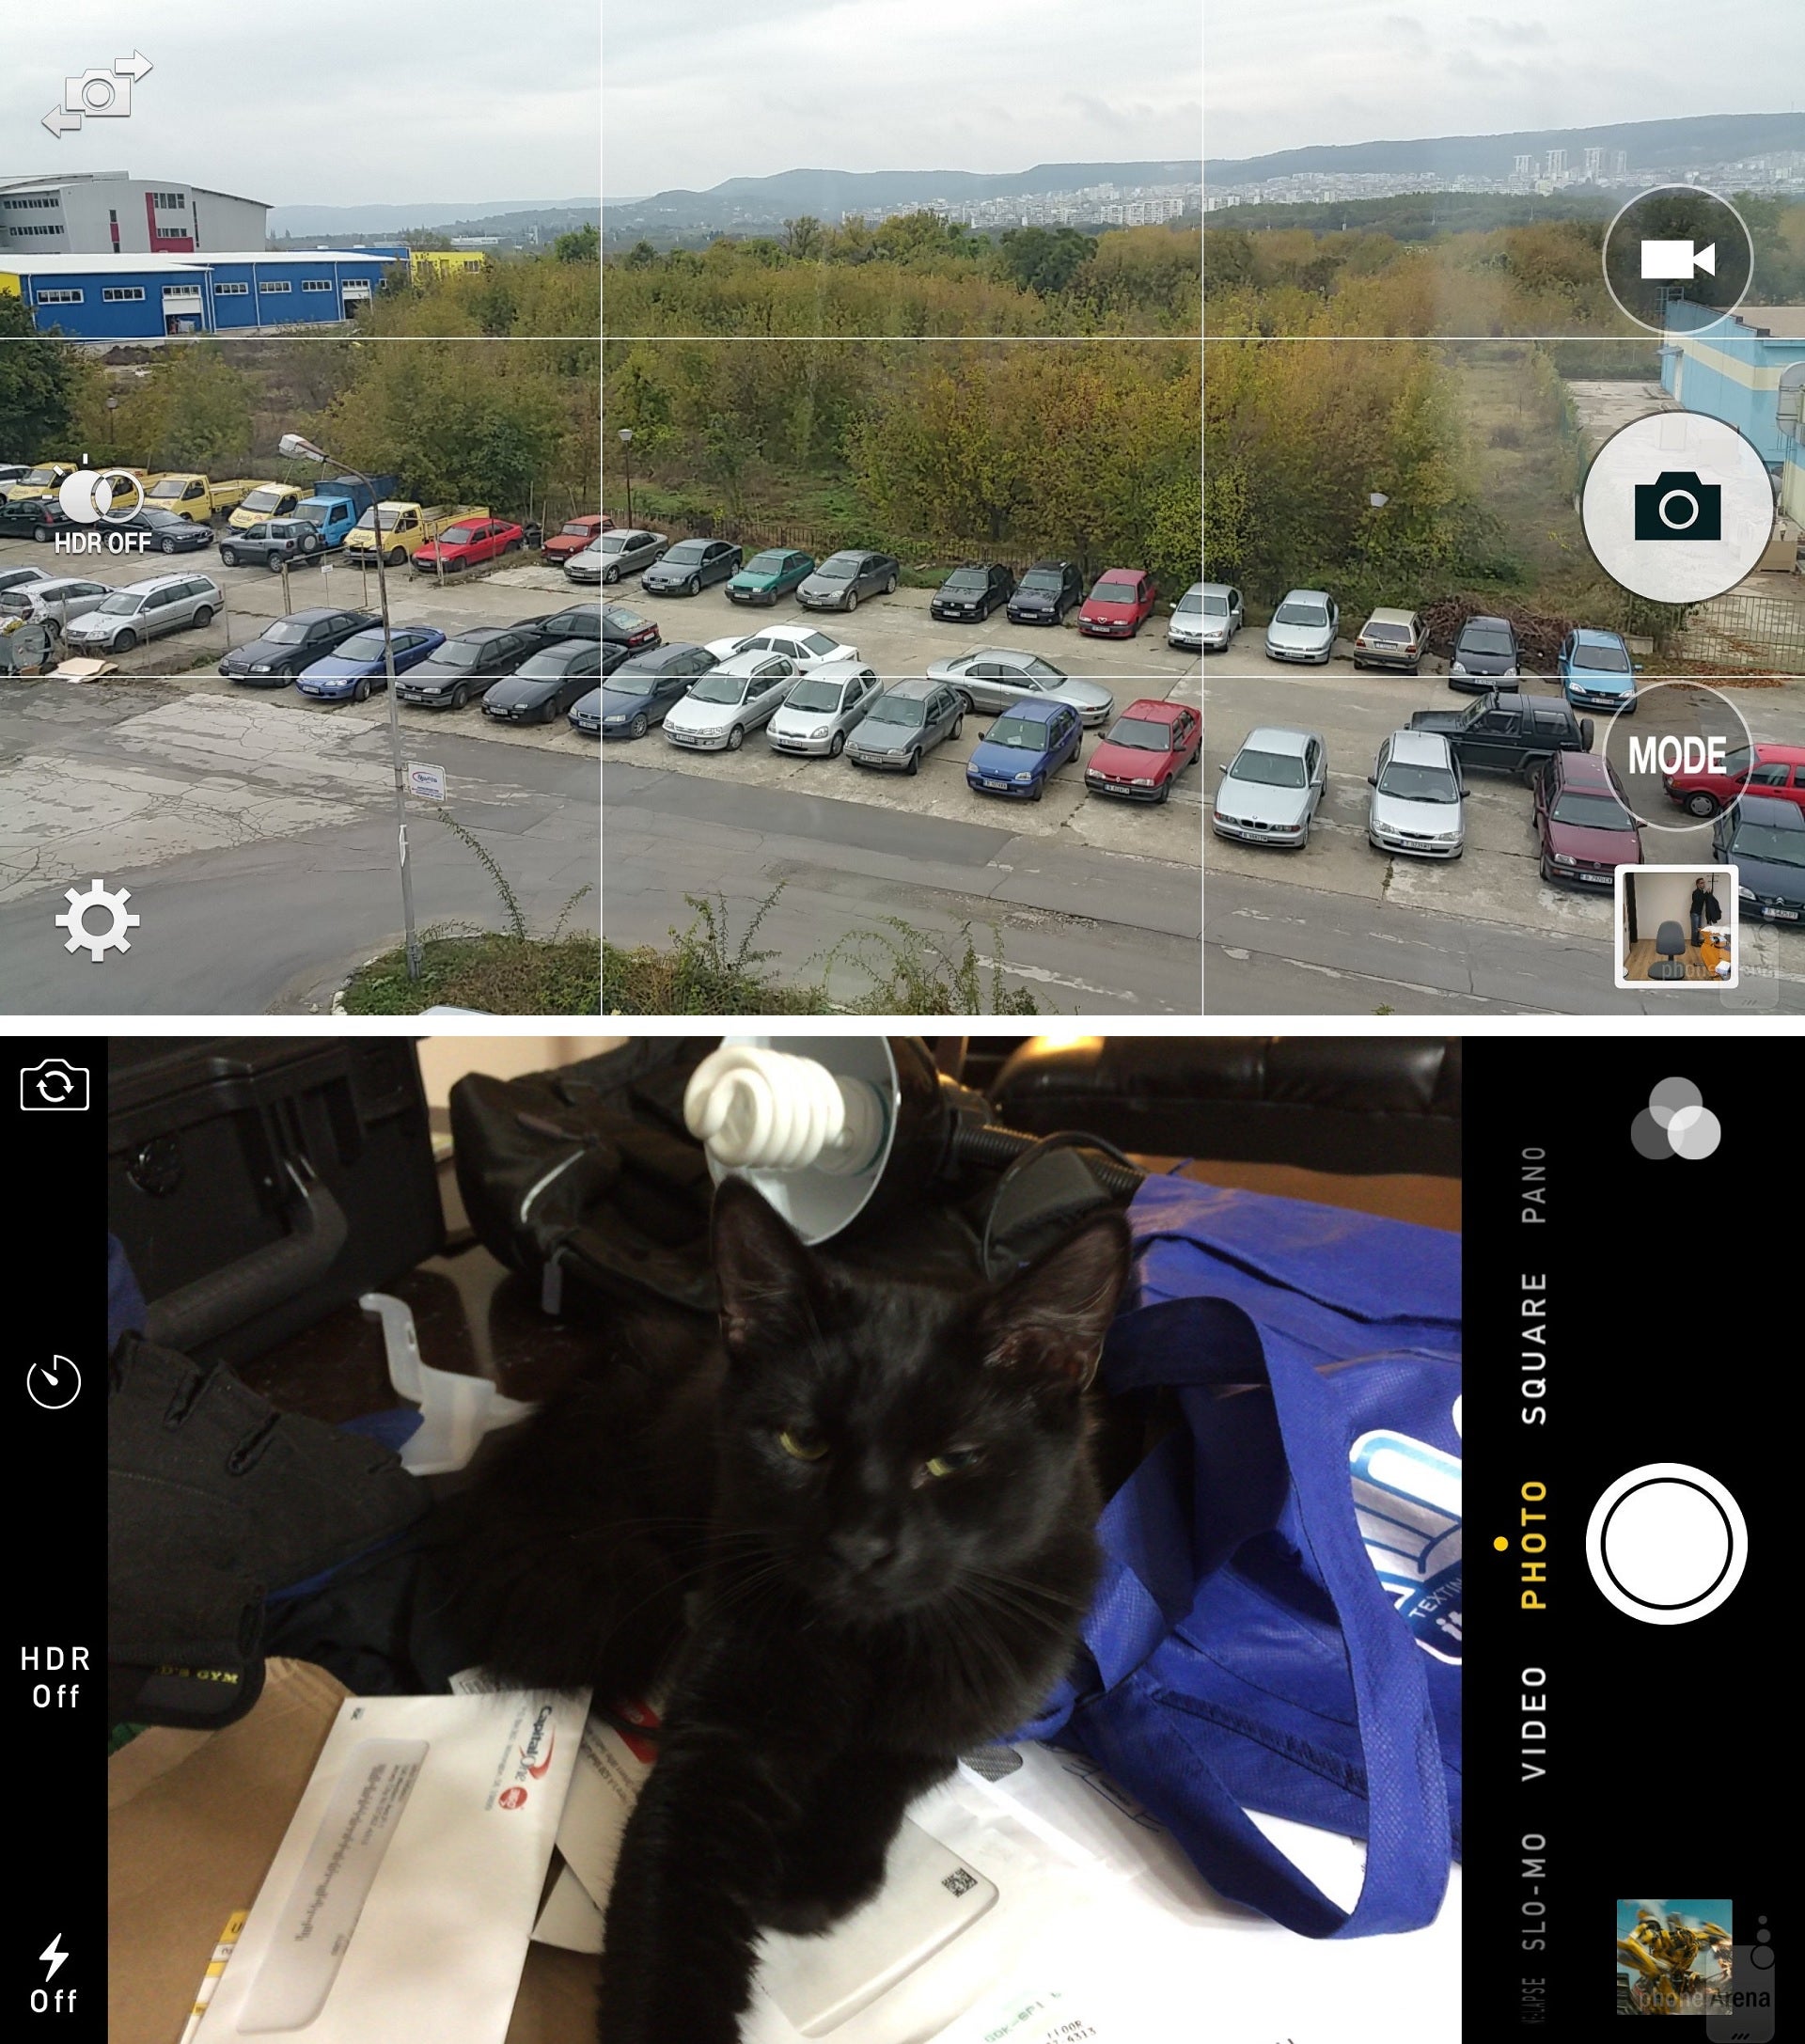 Camera interface - Note 4 (top) vs iPhone 6 Plus (bottom) - Galaxy Note 4 vs iPhone 6 Plus: vote for the better phone